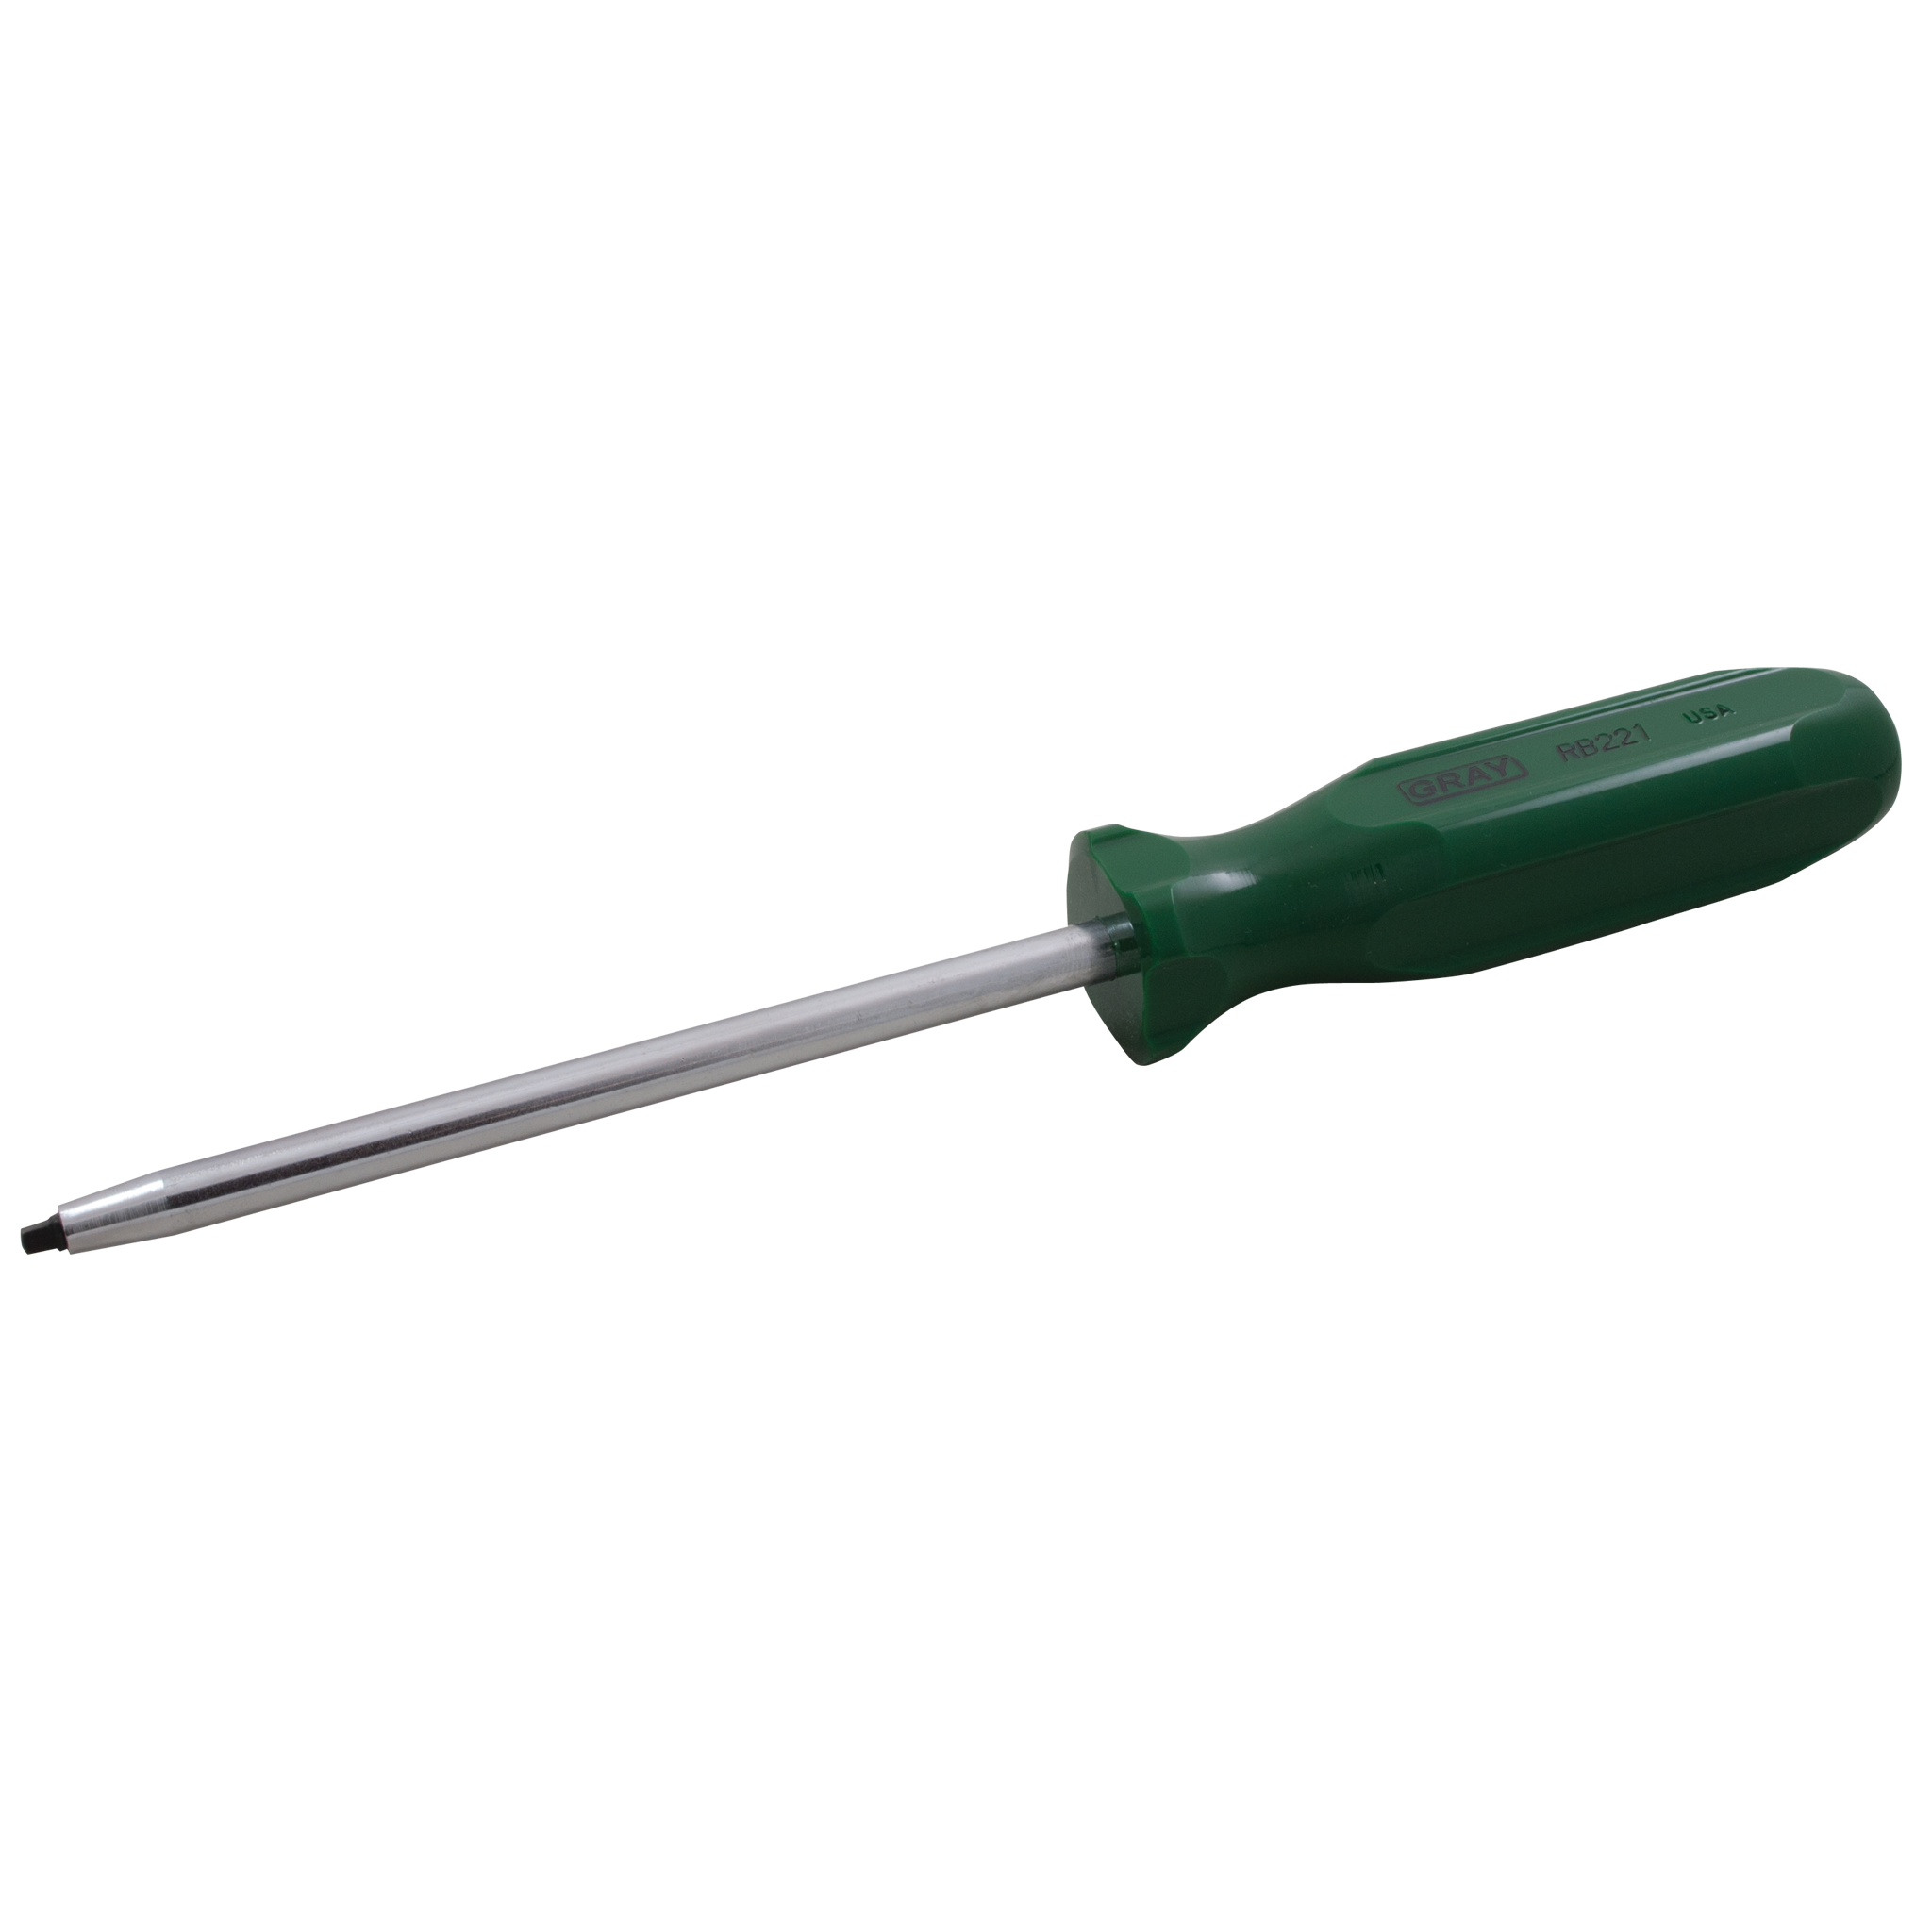 Square Recess, Round Shank Screwdrivers